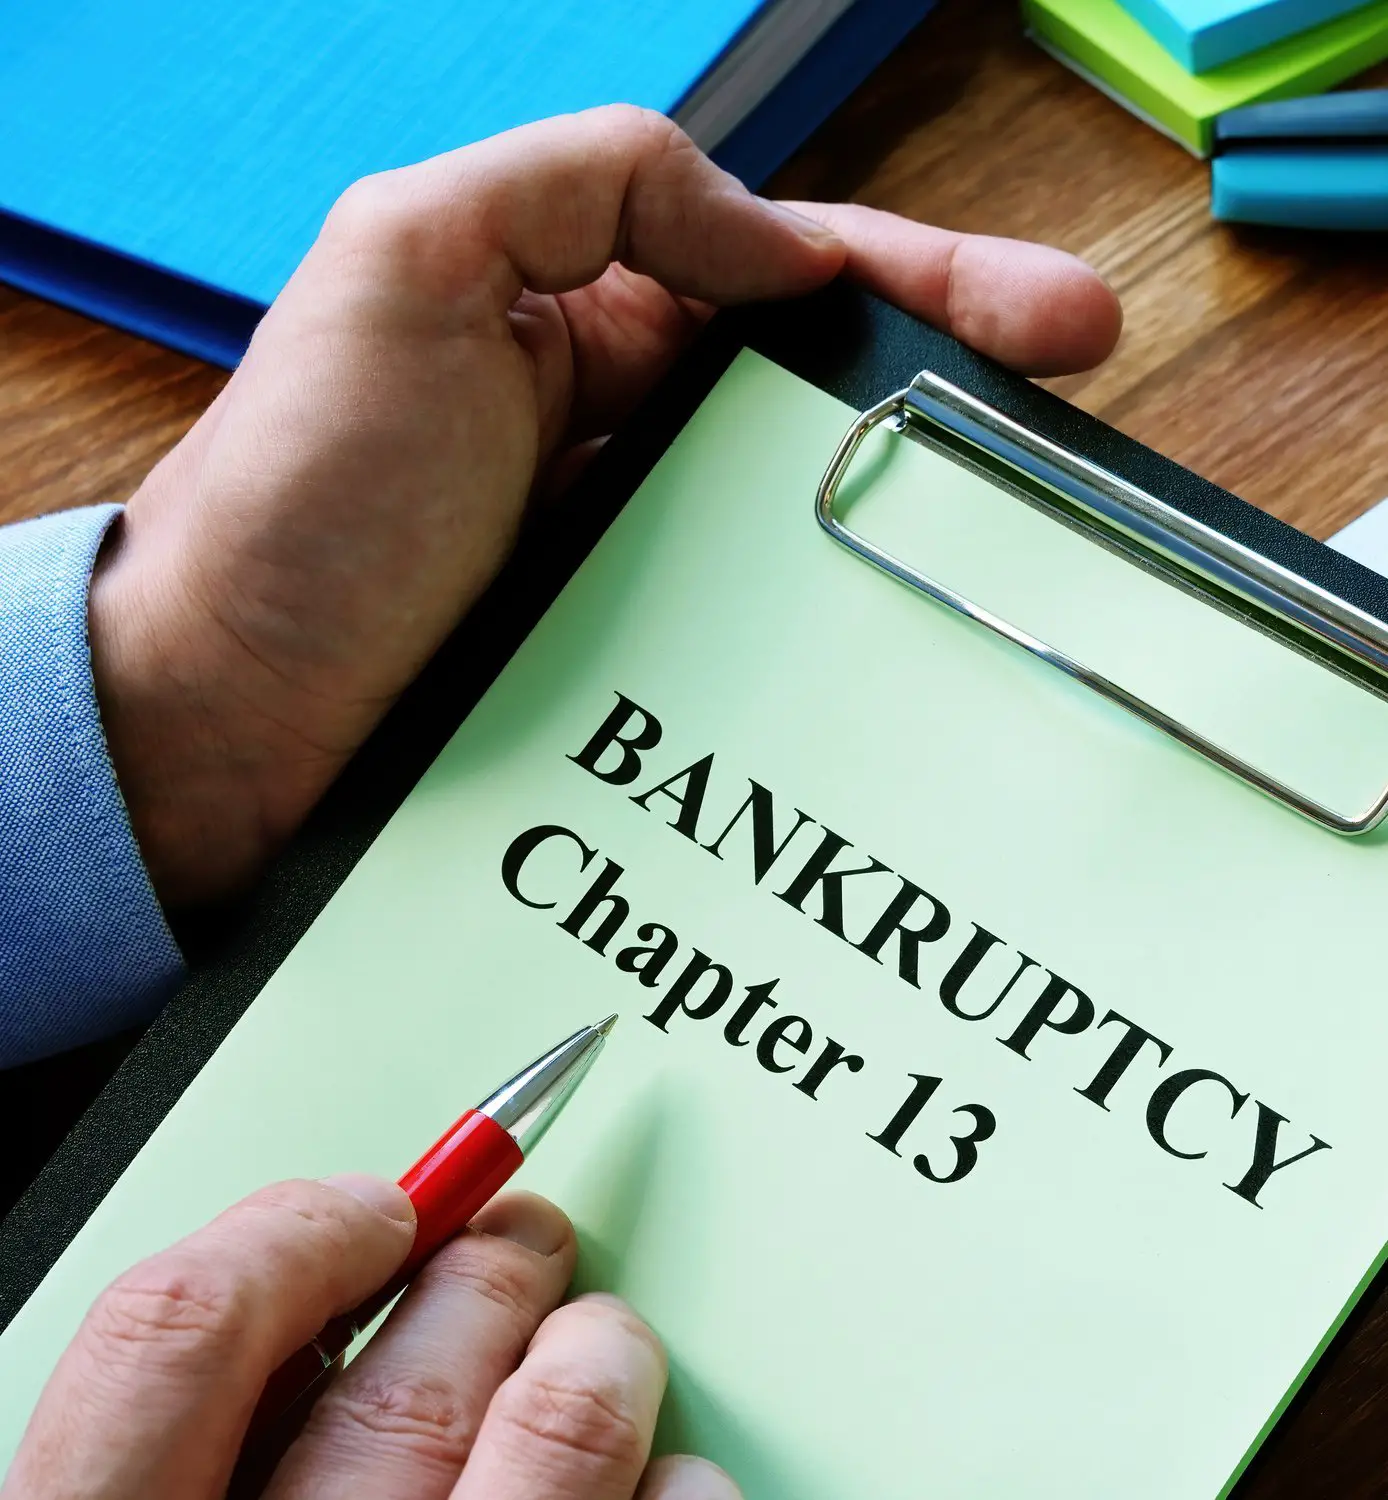 Chapter 13 Bankruptcy